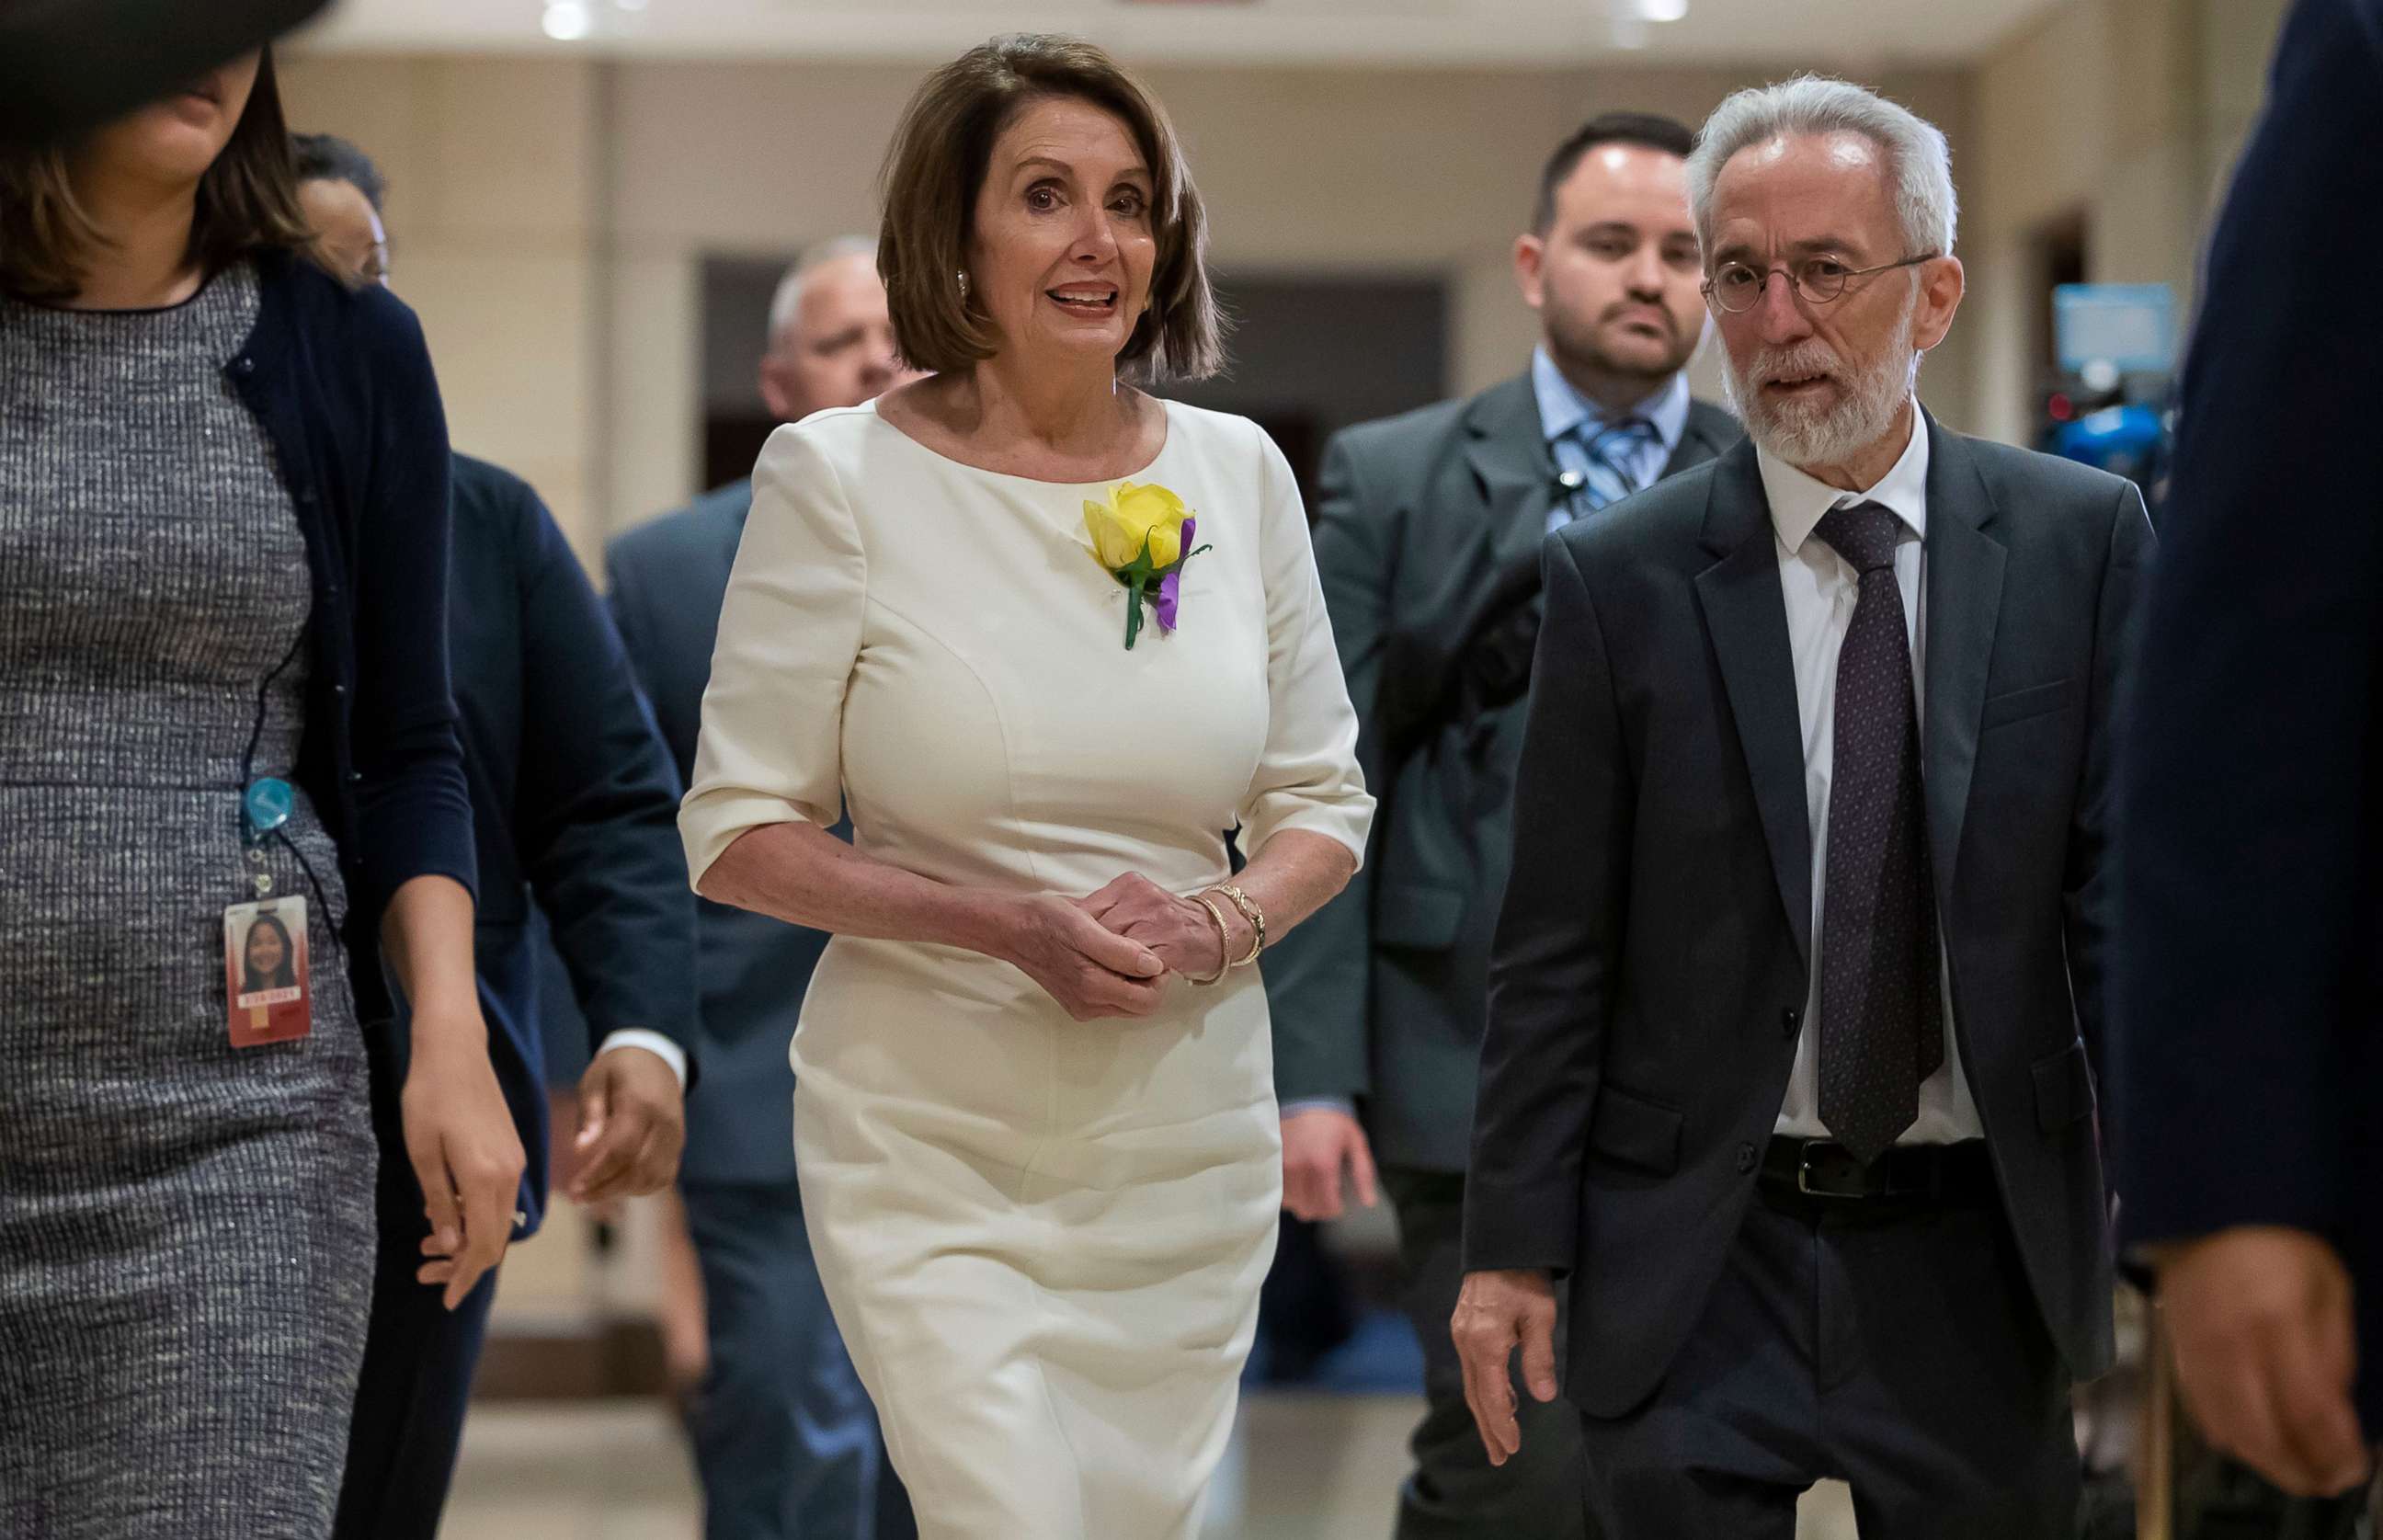 PHOTO: Speaker of the House, Nancy Pelosi arrives to attend a classified intelligence briefing at the Capitol in Washington, May 21, 2019.